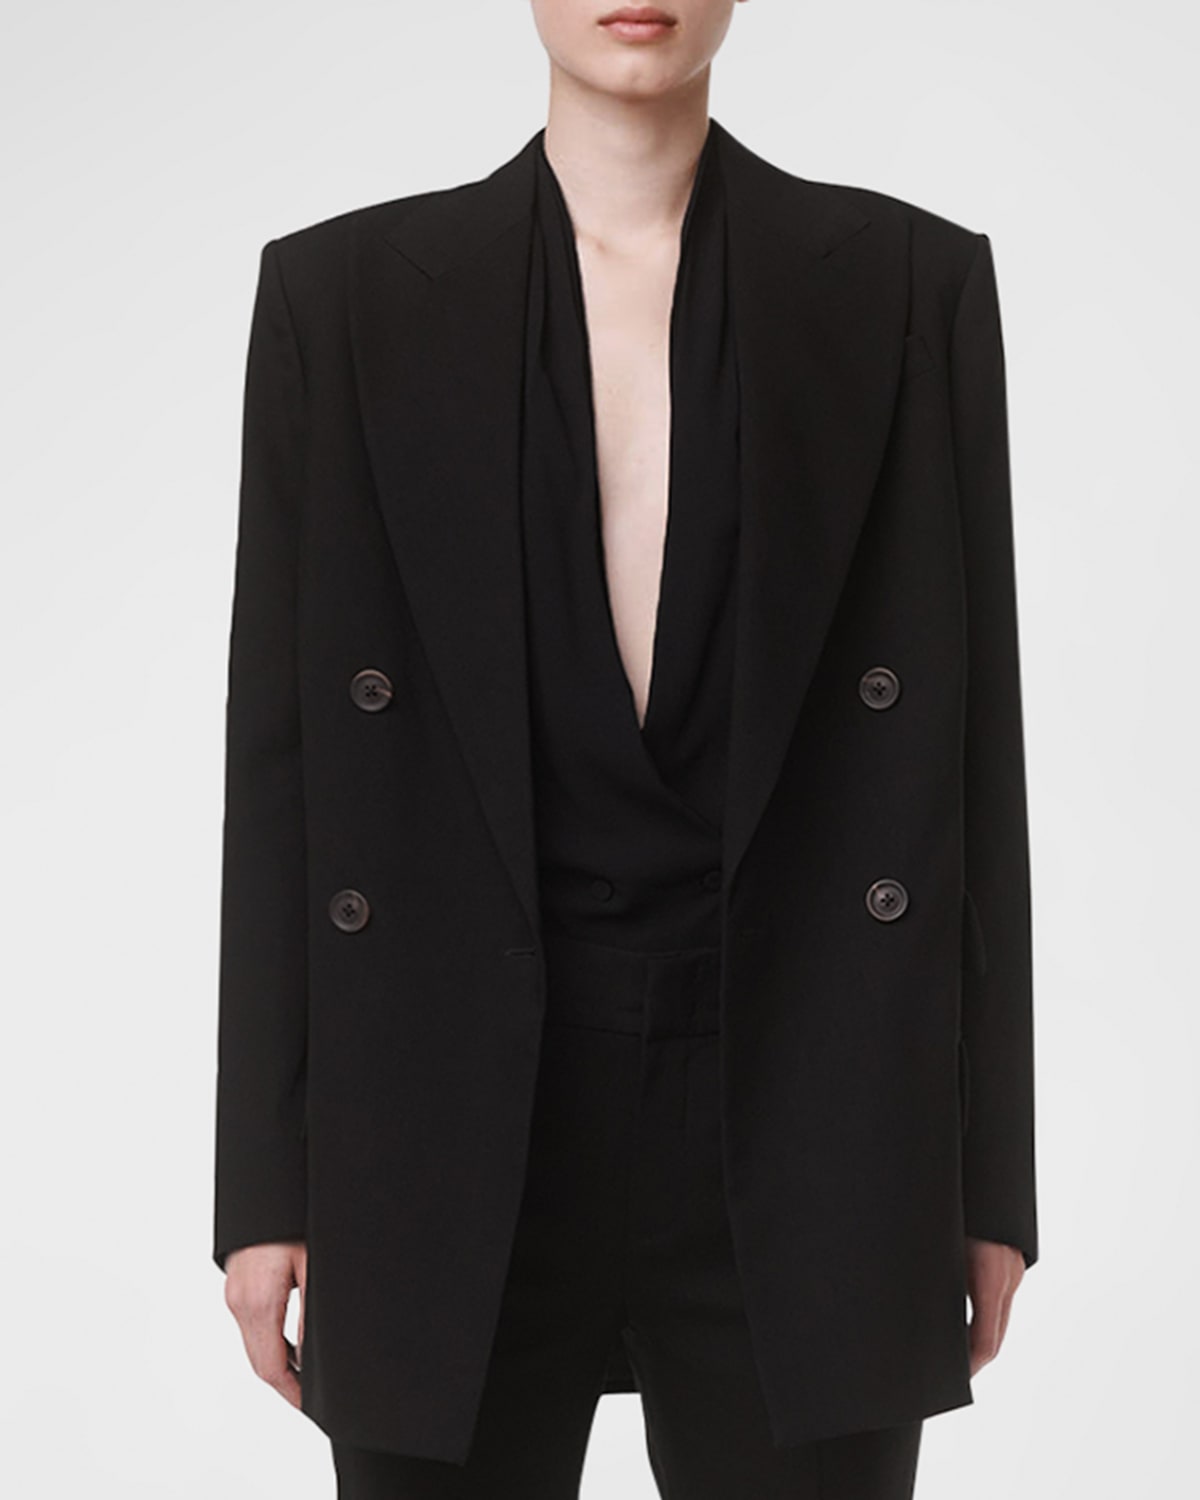 Another Tomorrow Oversize Blazer Jacket With Side Zipper Vents In Black